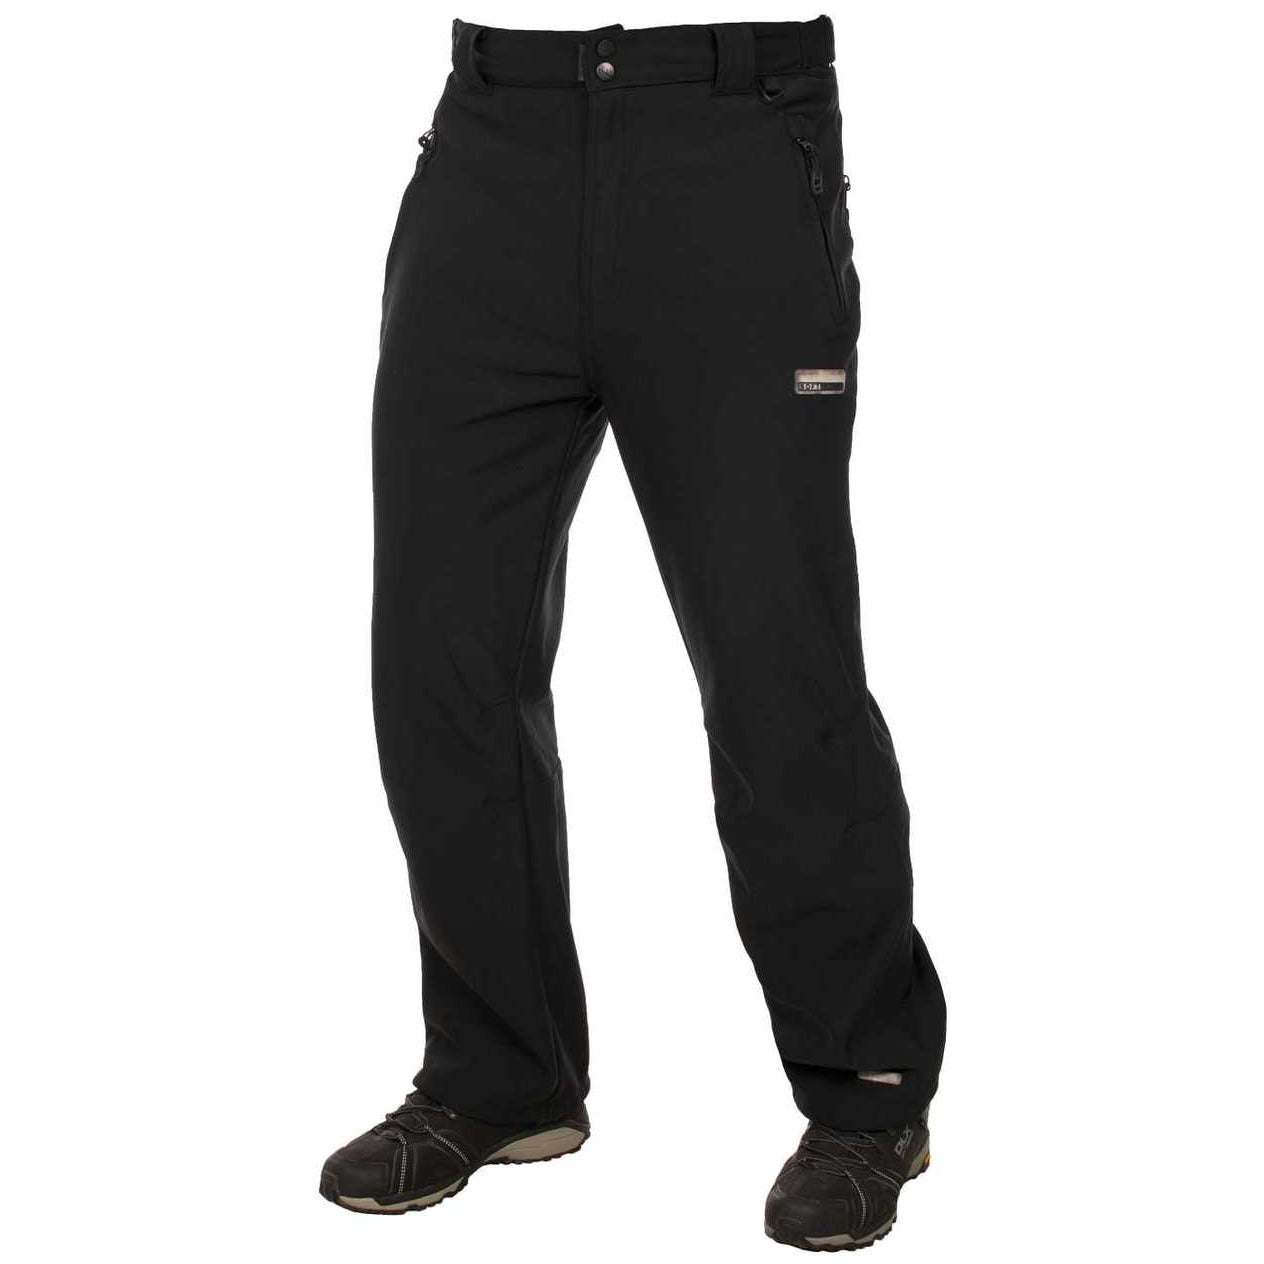 Outdoor Trousers for Men